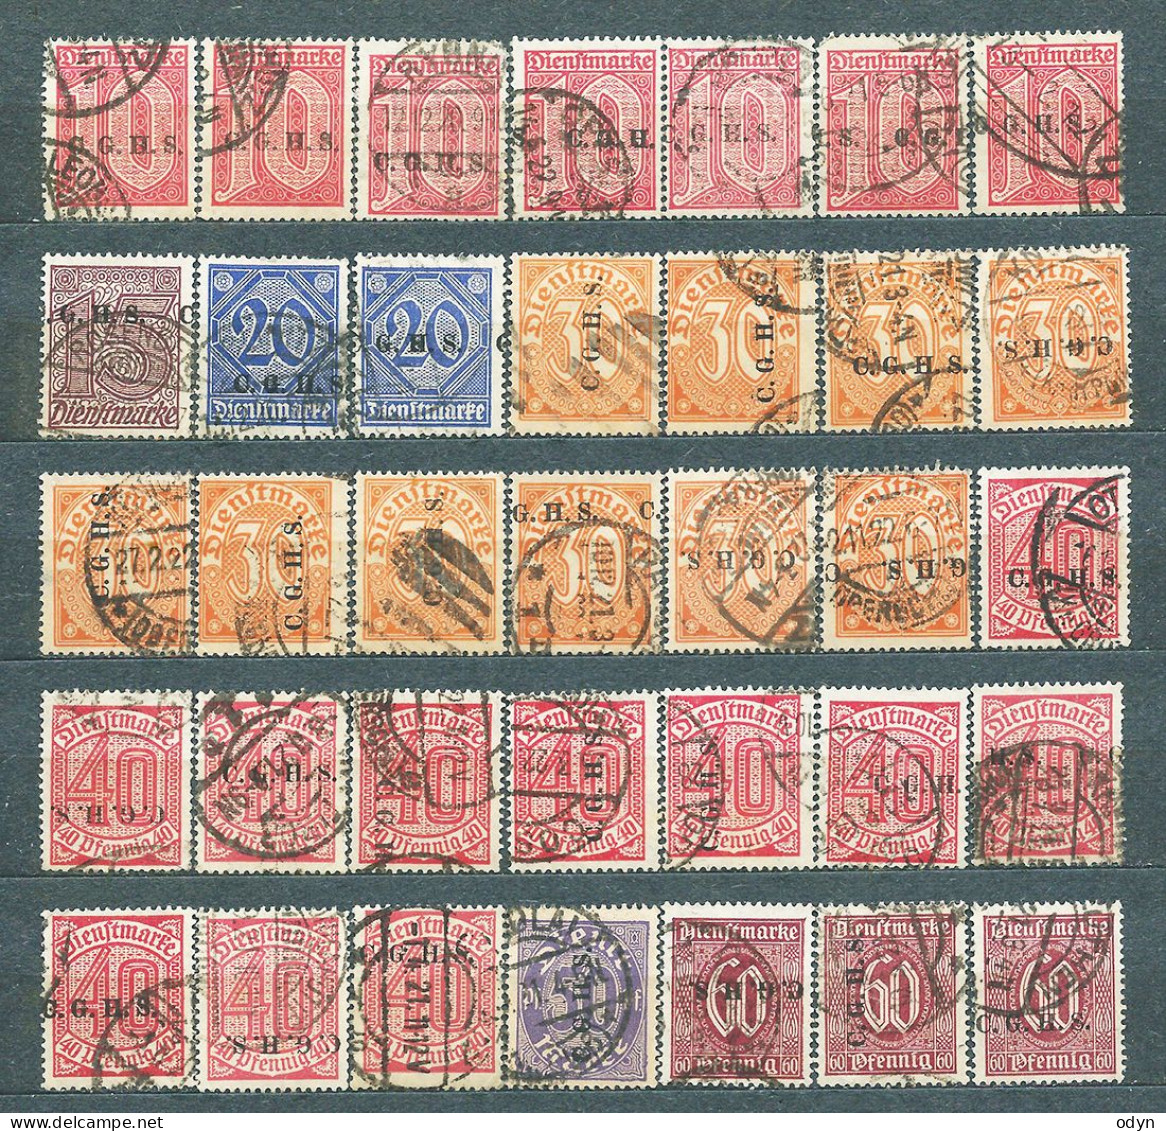 Upper Silesia, 1920, Officials, 82 Stamps From Set MiNr 8-20 (incl. 4 Stamps #18 Wz. 1) - Overprint C.G.H.S. - Used - Silezië